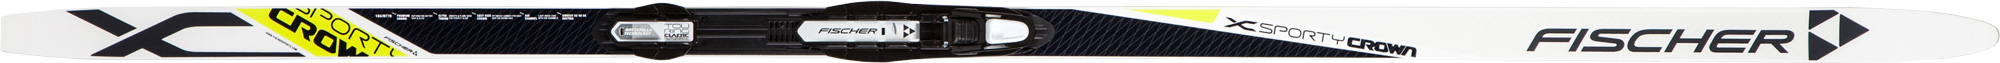 Nordic skis with ascent support